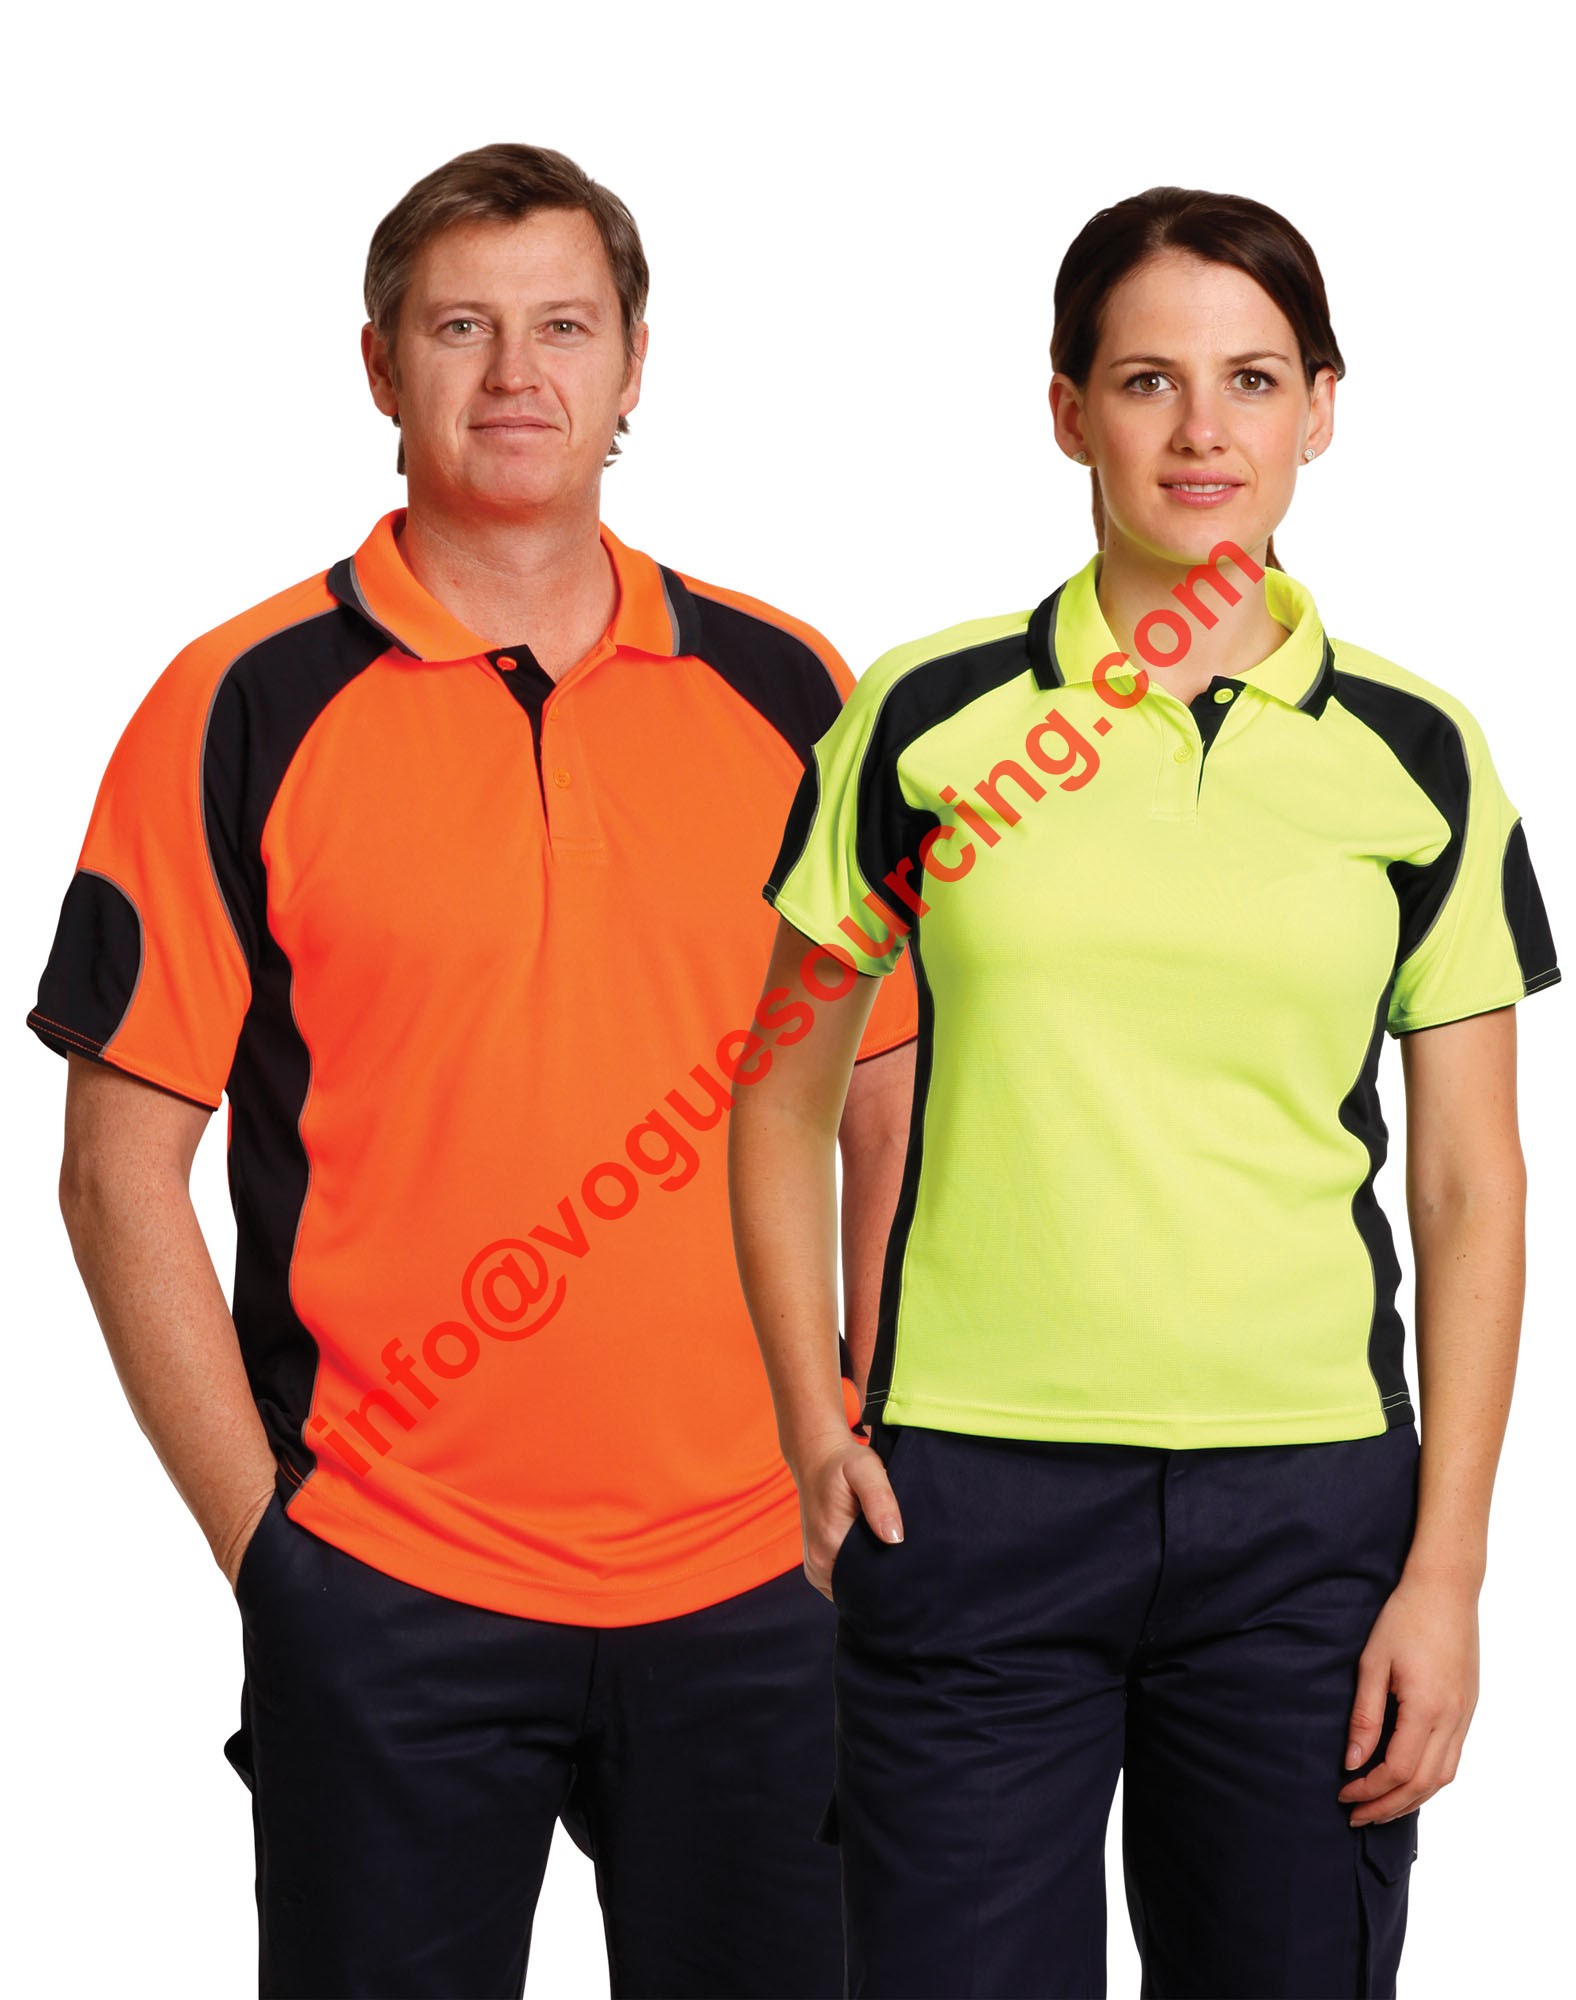 office-polo-shirt-manufacturers-suppliers-exporters-voguesourcing-tirupur-india